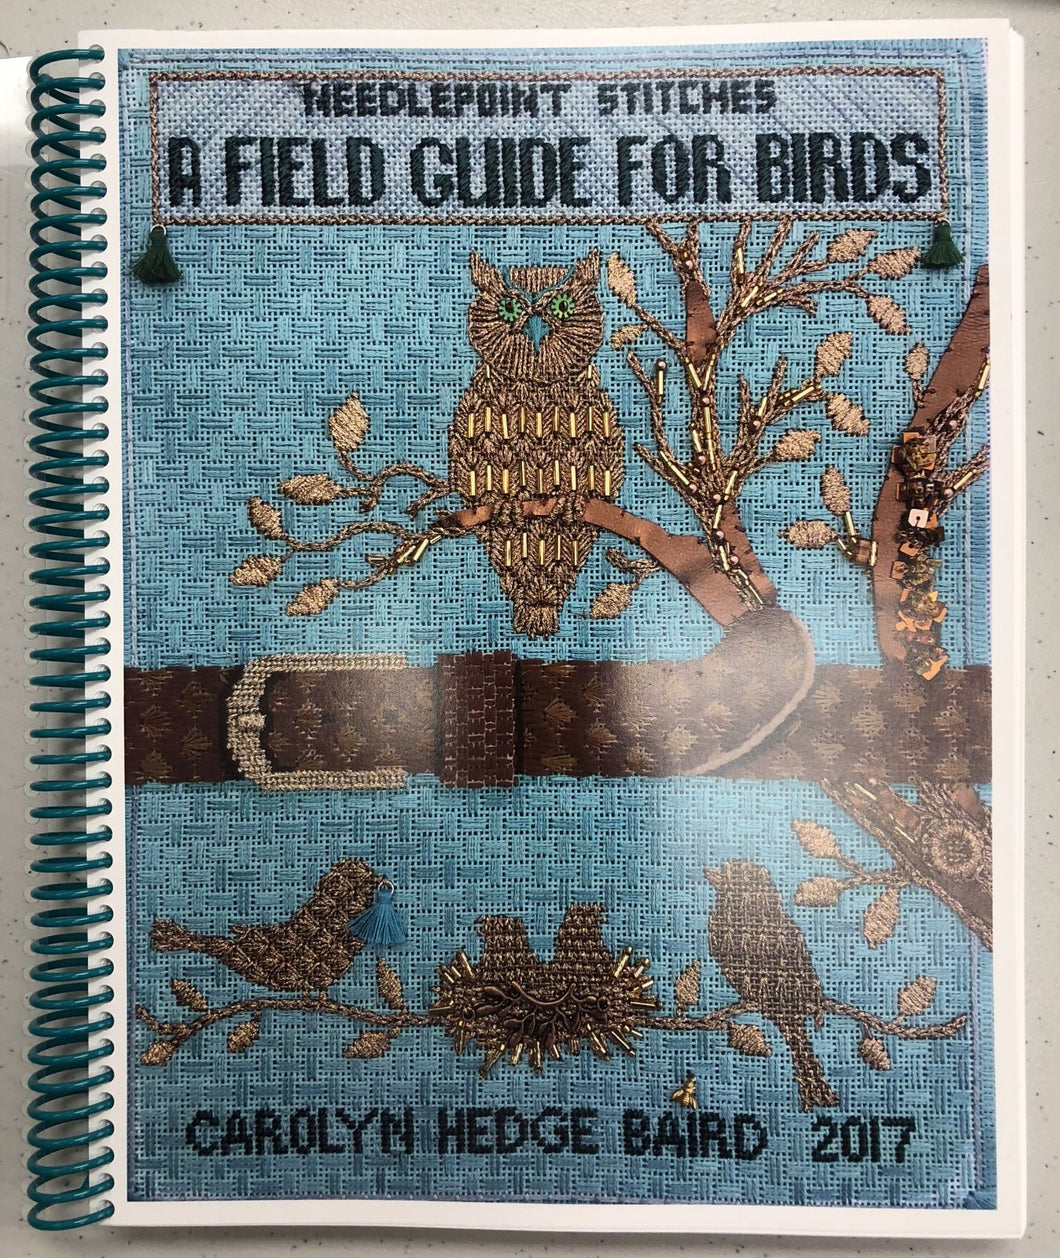 needlepoint stitches: a field guide for birds